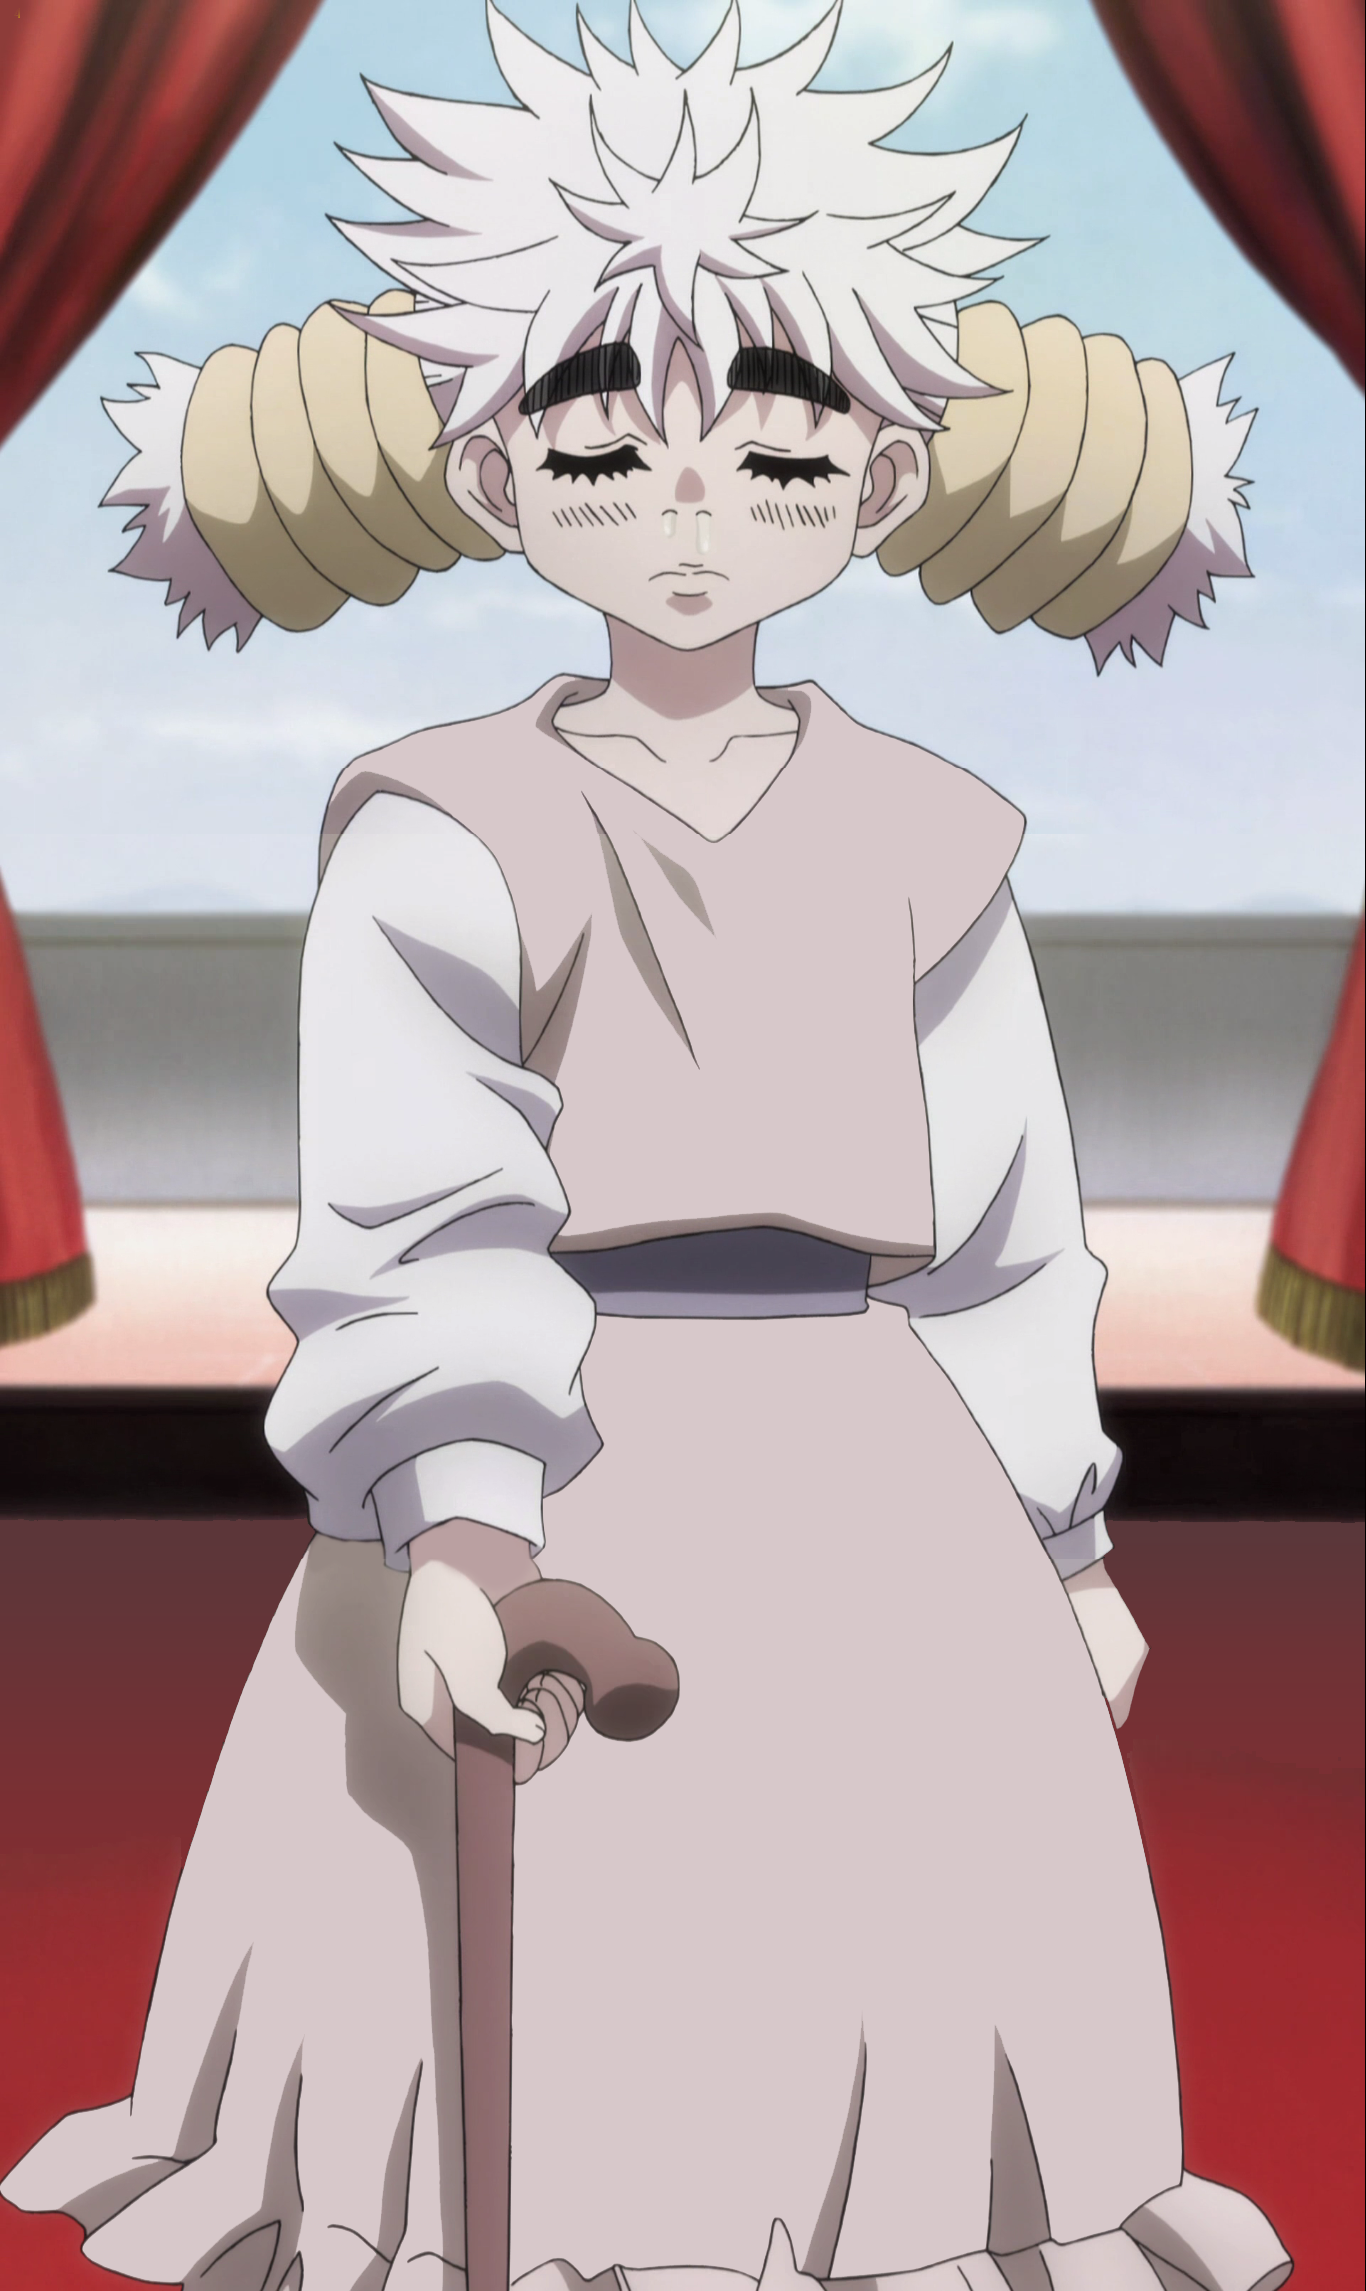 8. GUNGI AND KOMUGI - SCORE 8.6, Hunter X Hunter's Chimera Ant Arc truly  delivered an amazing story arc where humanity w…